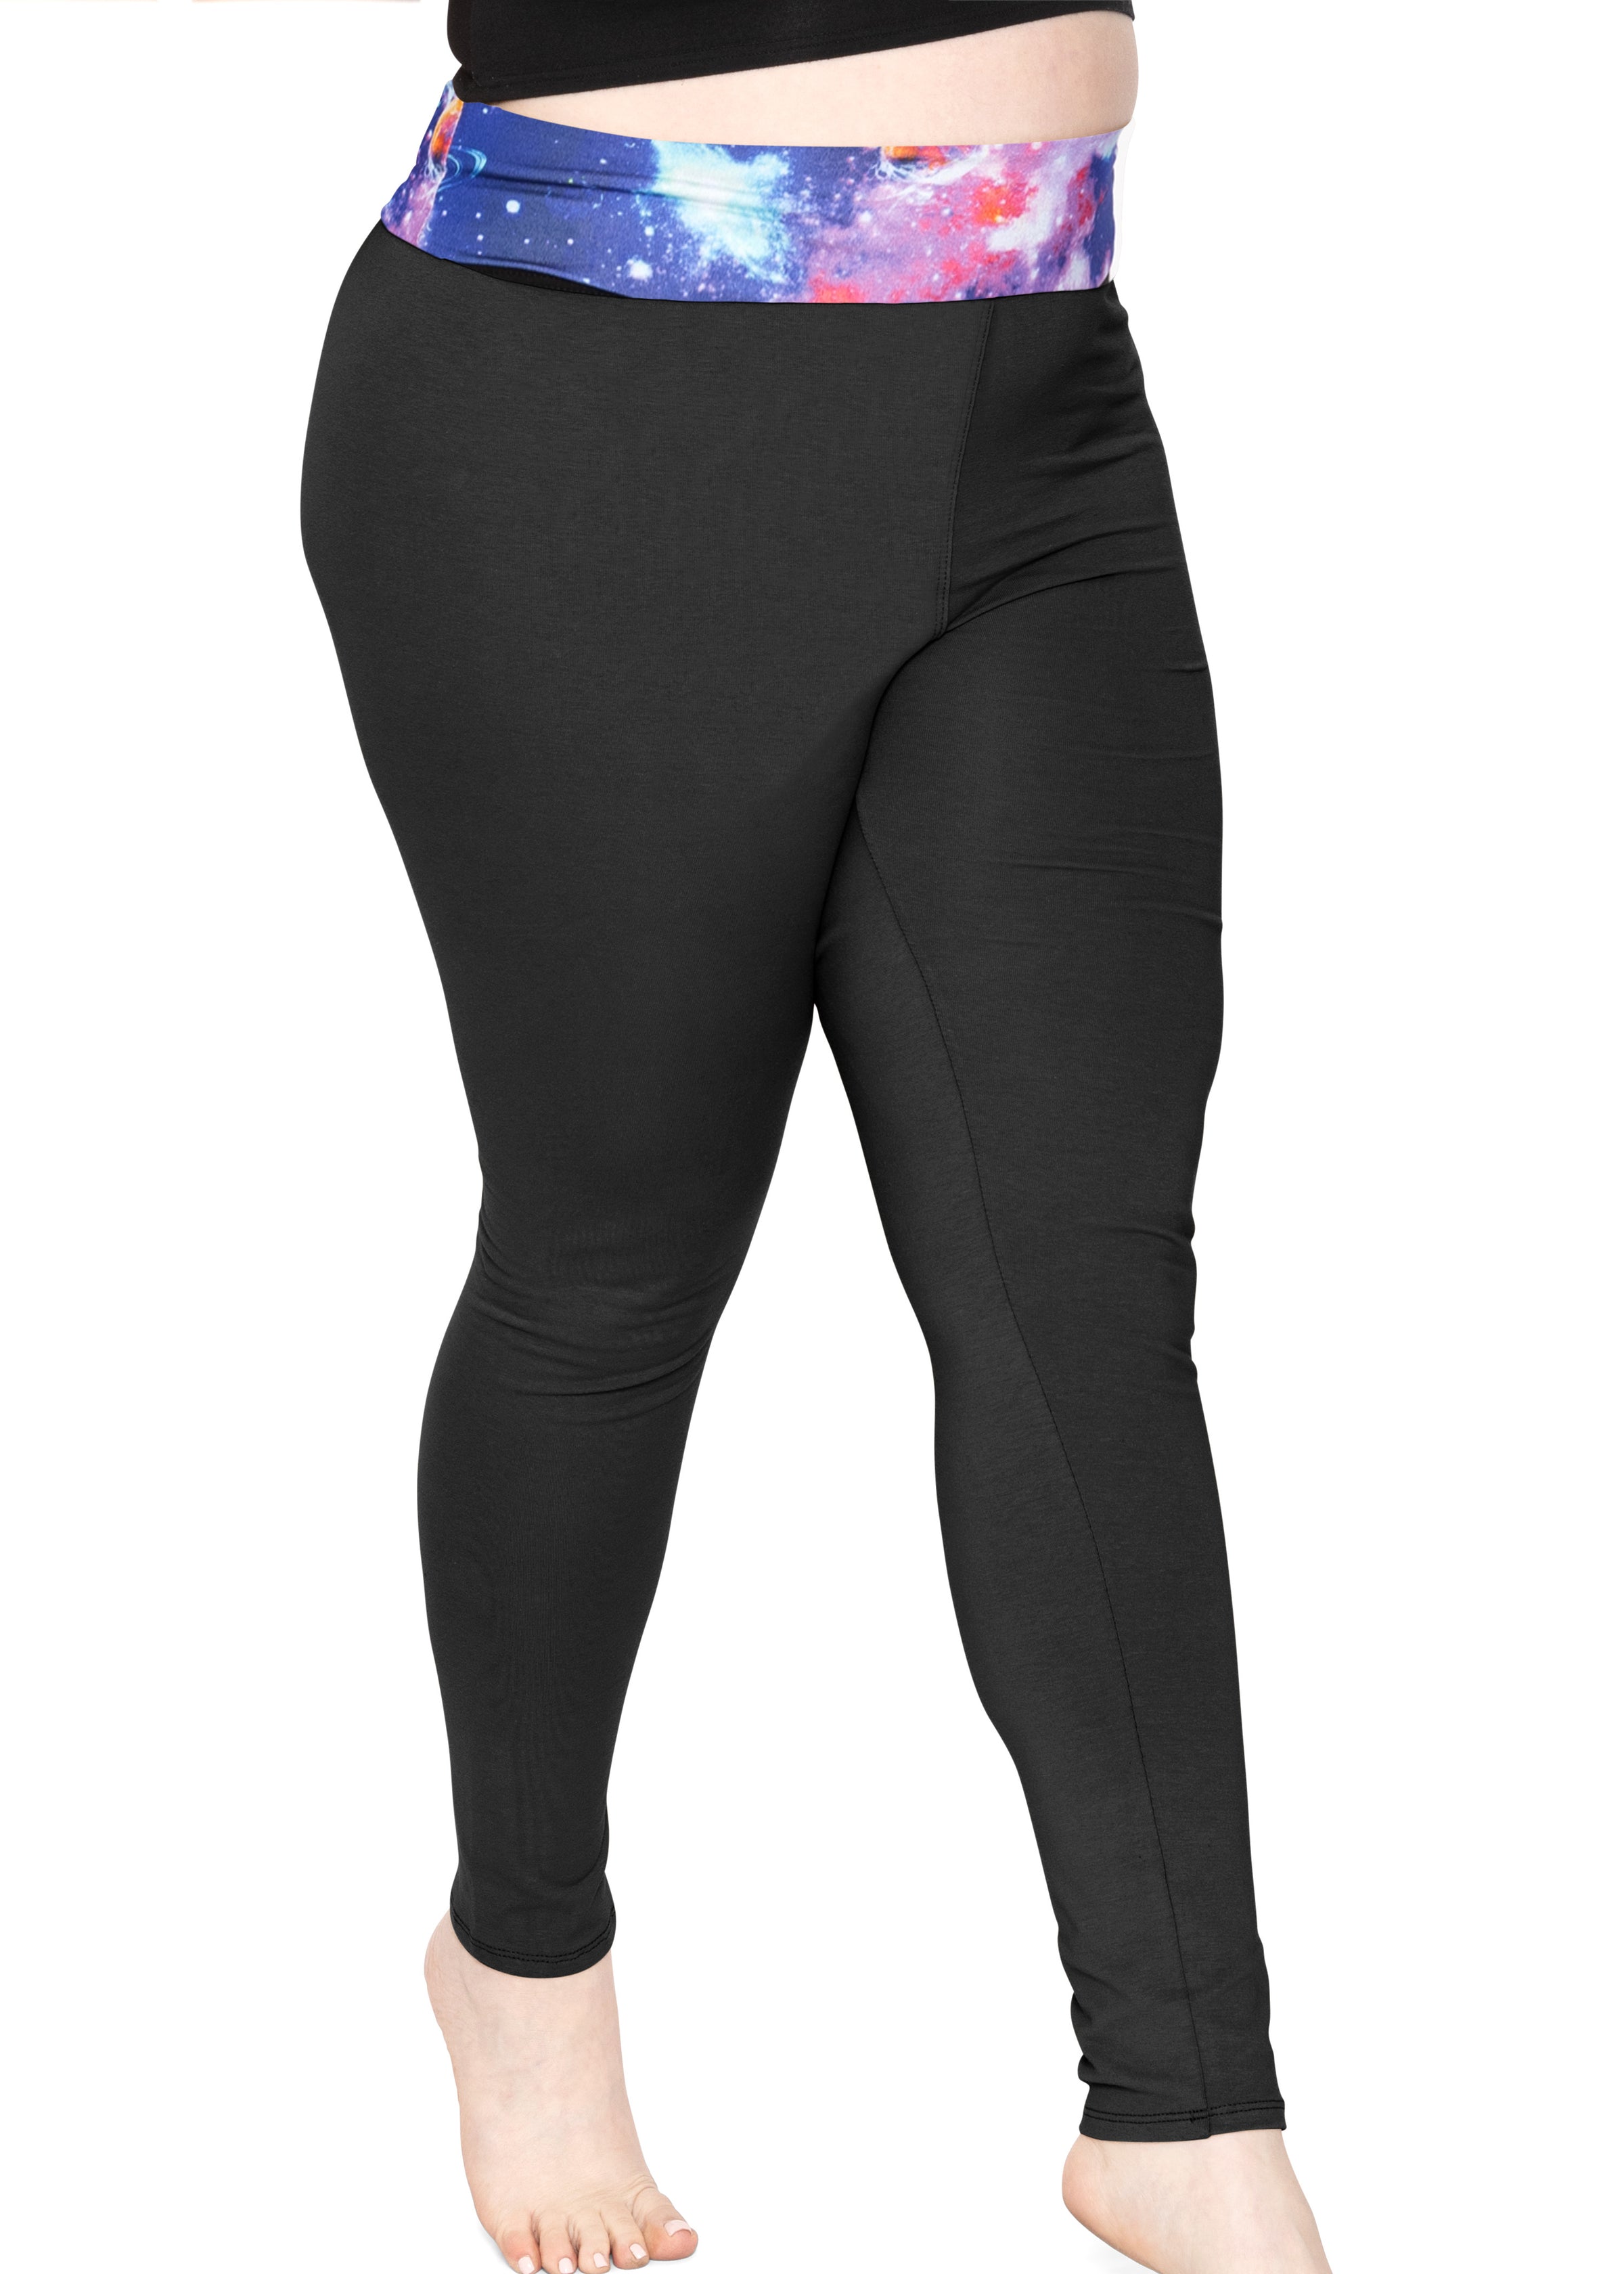 Comfort Lady Leggings Pack Of 6 Free Size (Assorted Color)